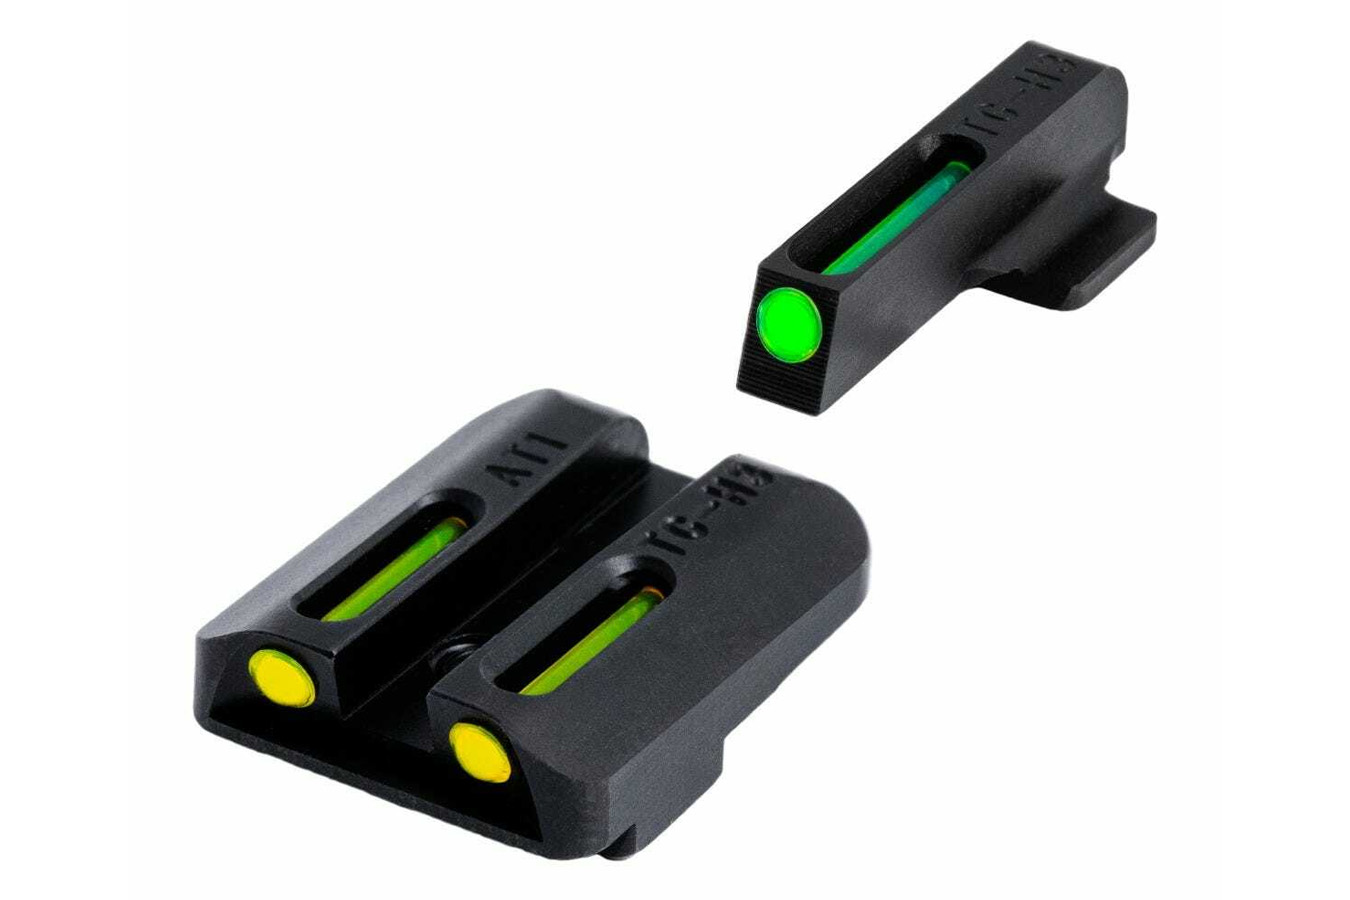 TRUGLO TFO DAY/NIGHT SIGHT SET FOR GLOCK 42/43 (GREEN FRONT/YELLOW REAR)